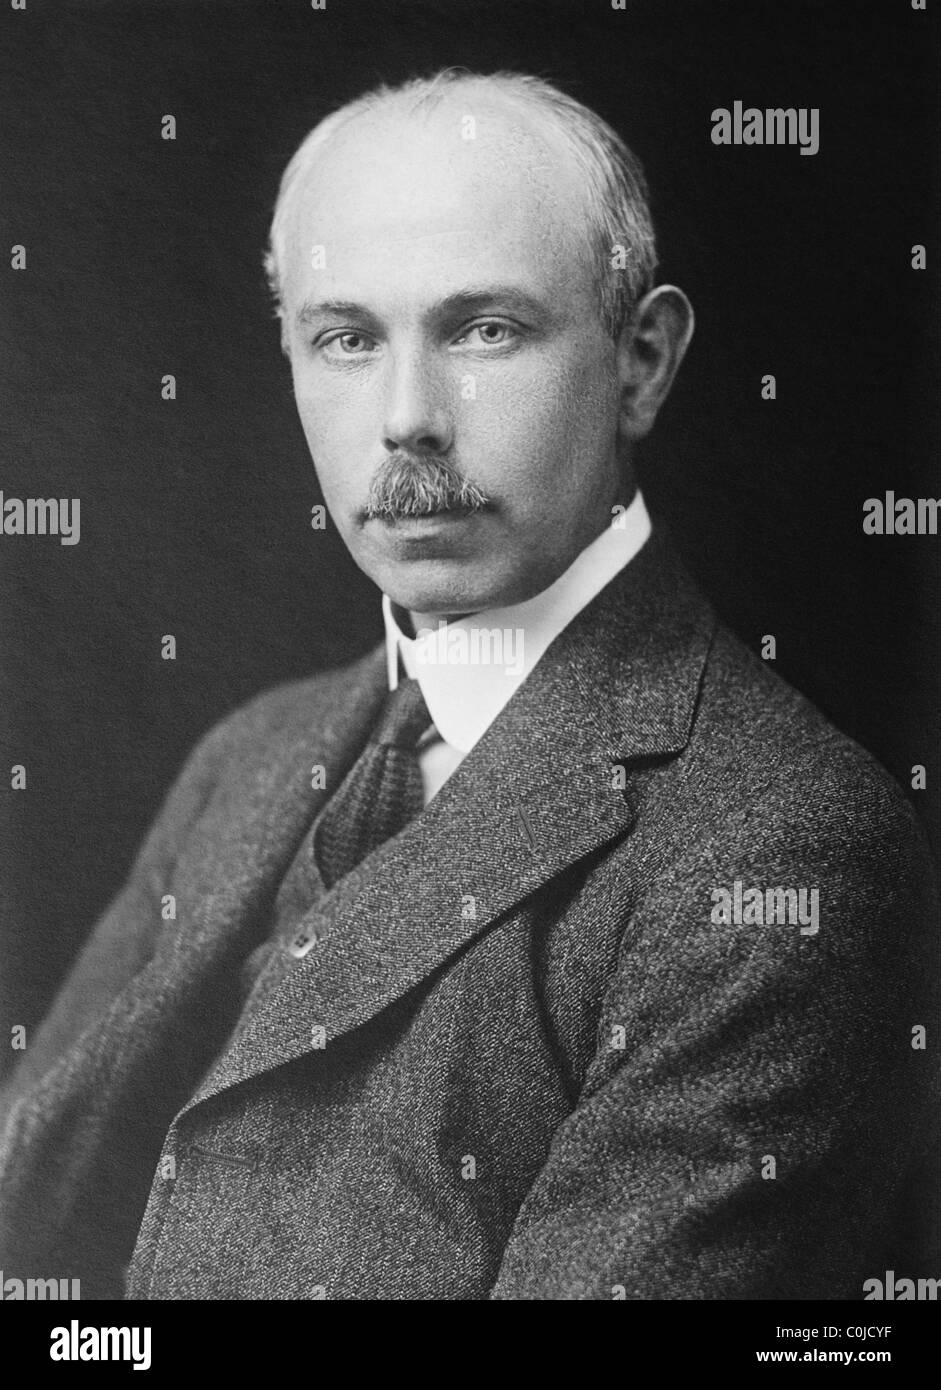 English chemist and physicist Francis William Aston (1877 - 1945) - winner of the Nobel Prize in Chemistry in 1922. Stock Photo